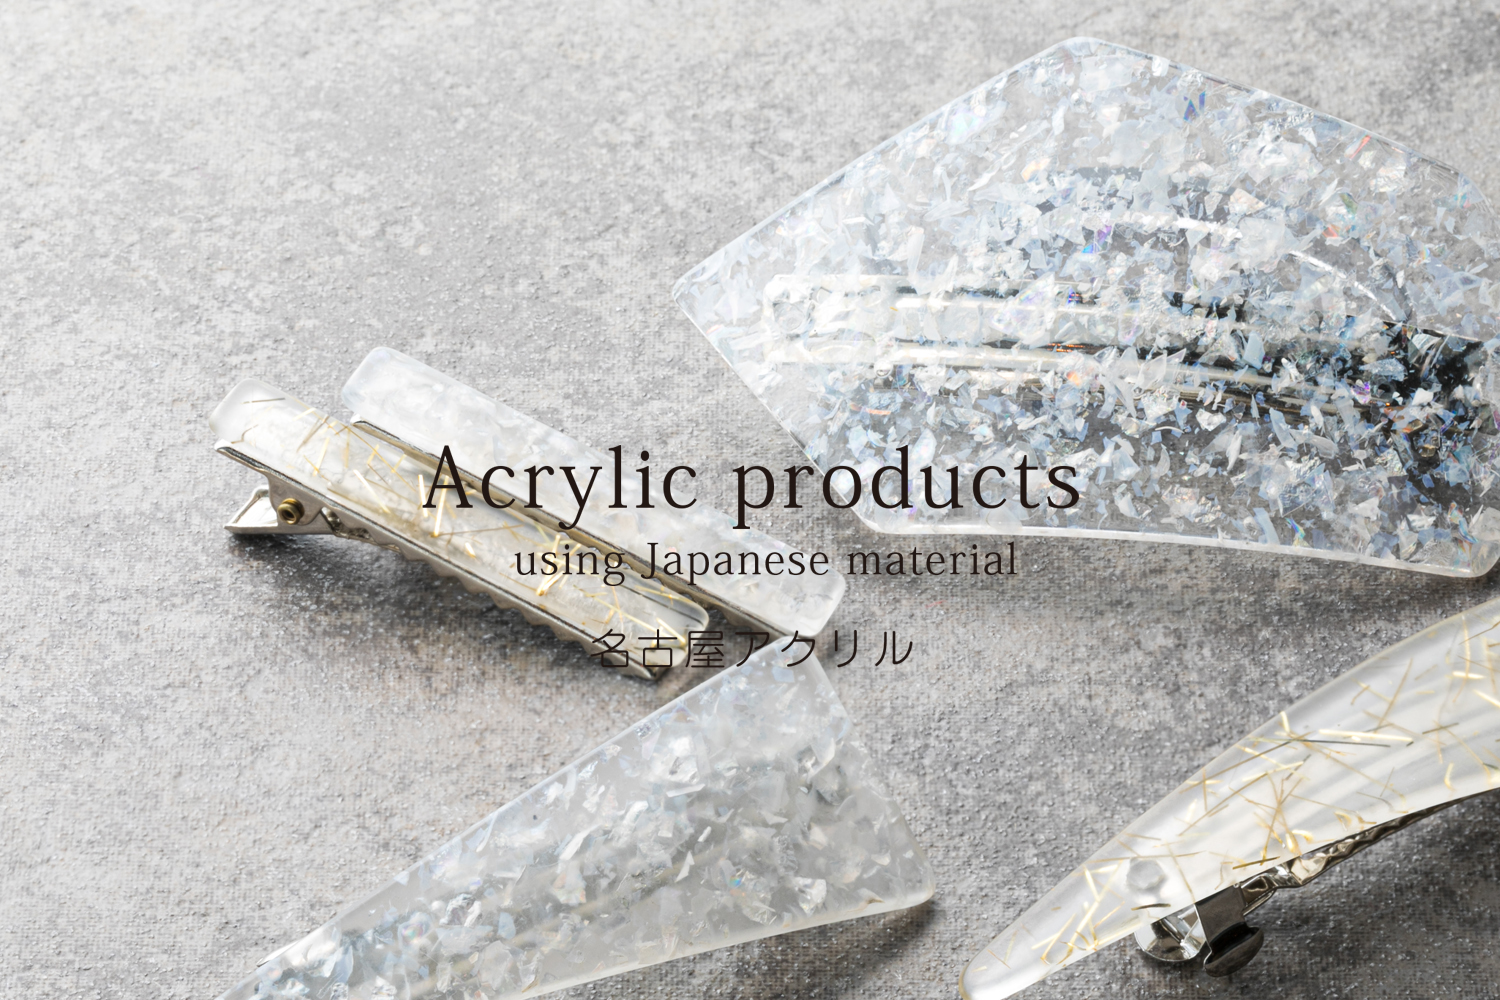 Acrylic products